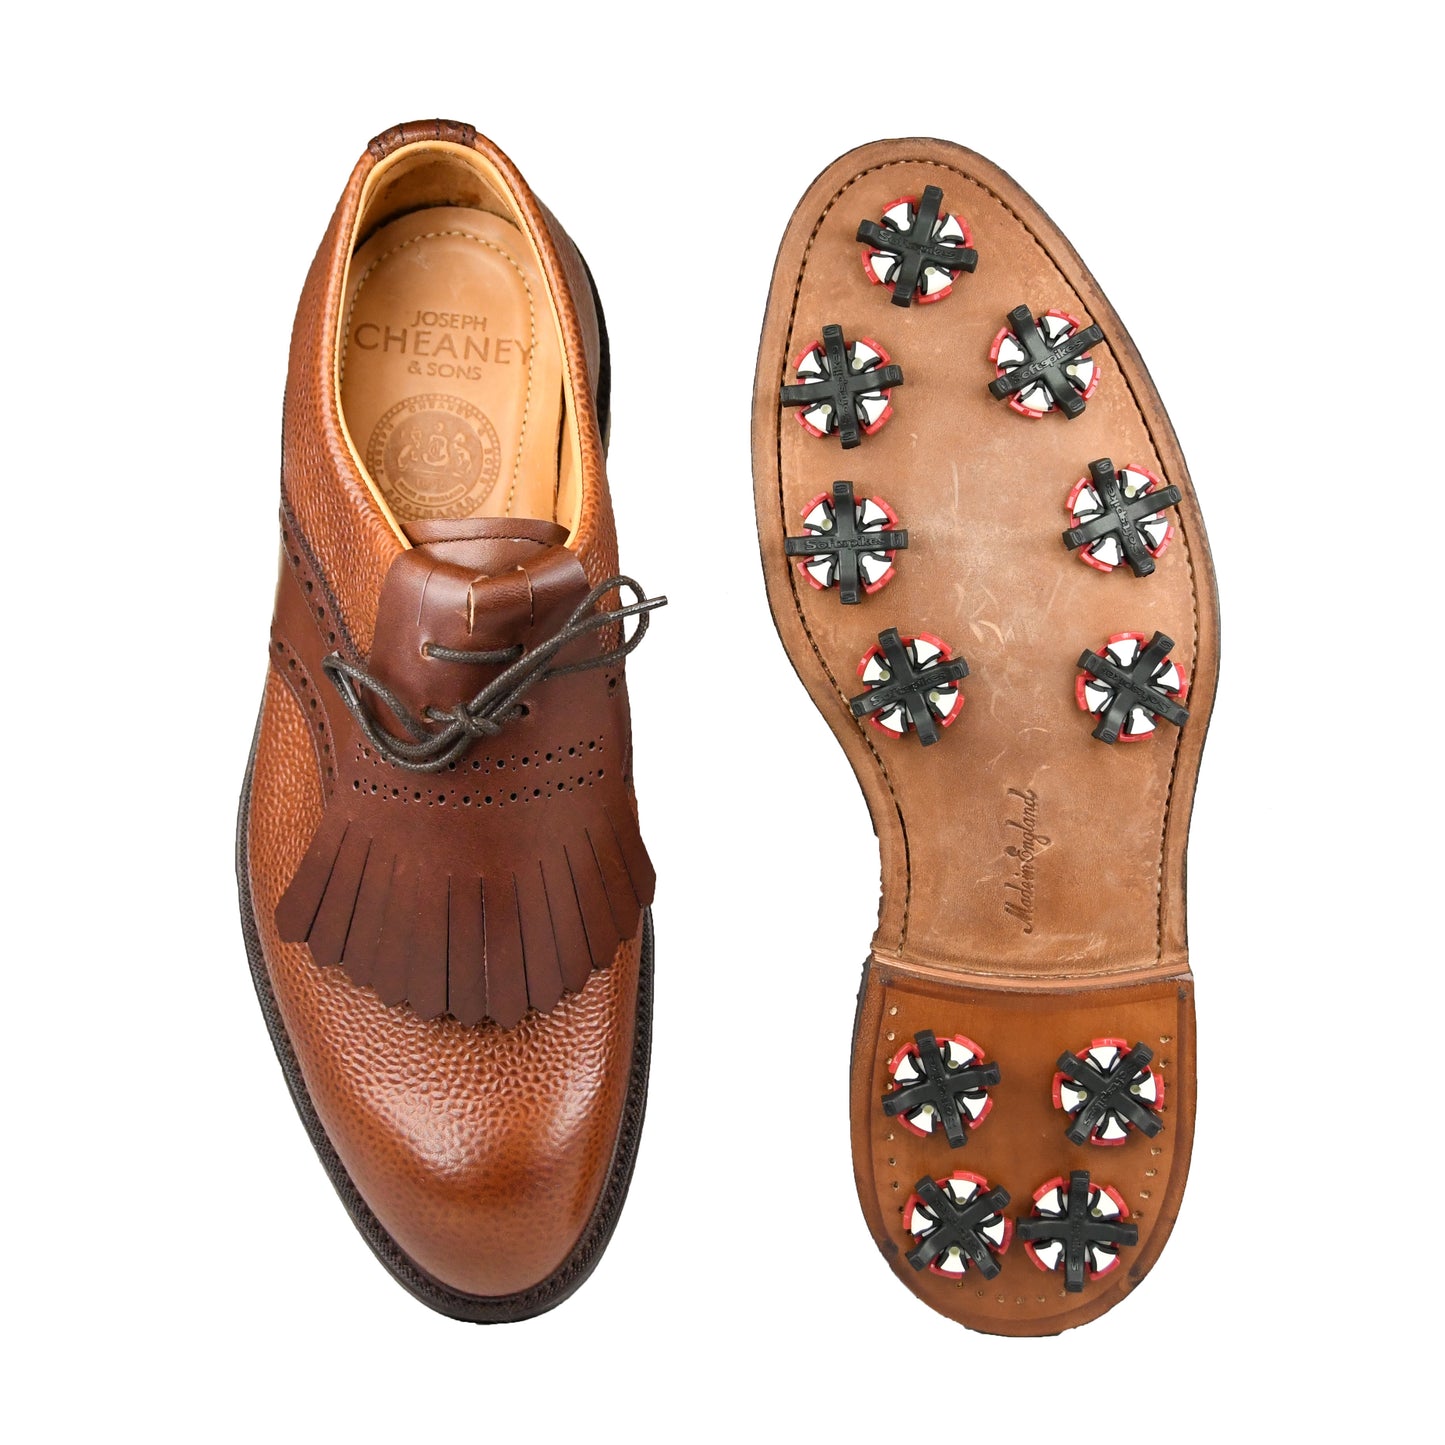 Turnberry Brown Wax Calf, Joseph Cheaney & Sons